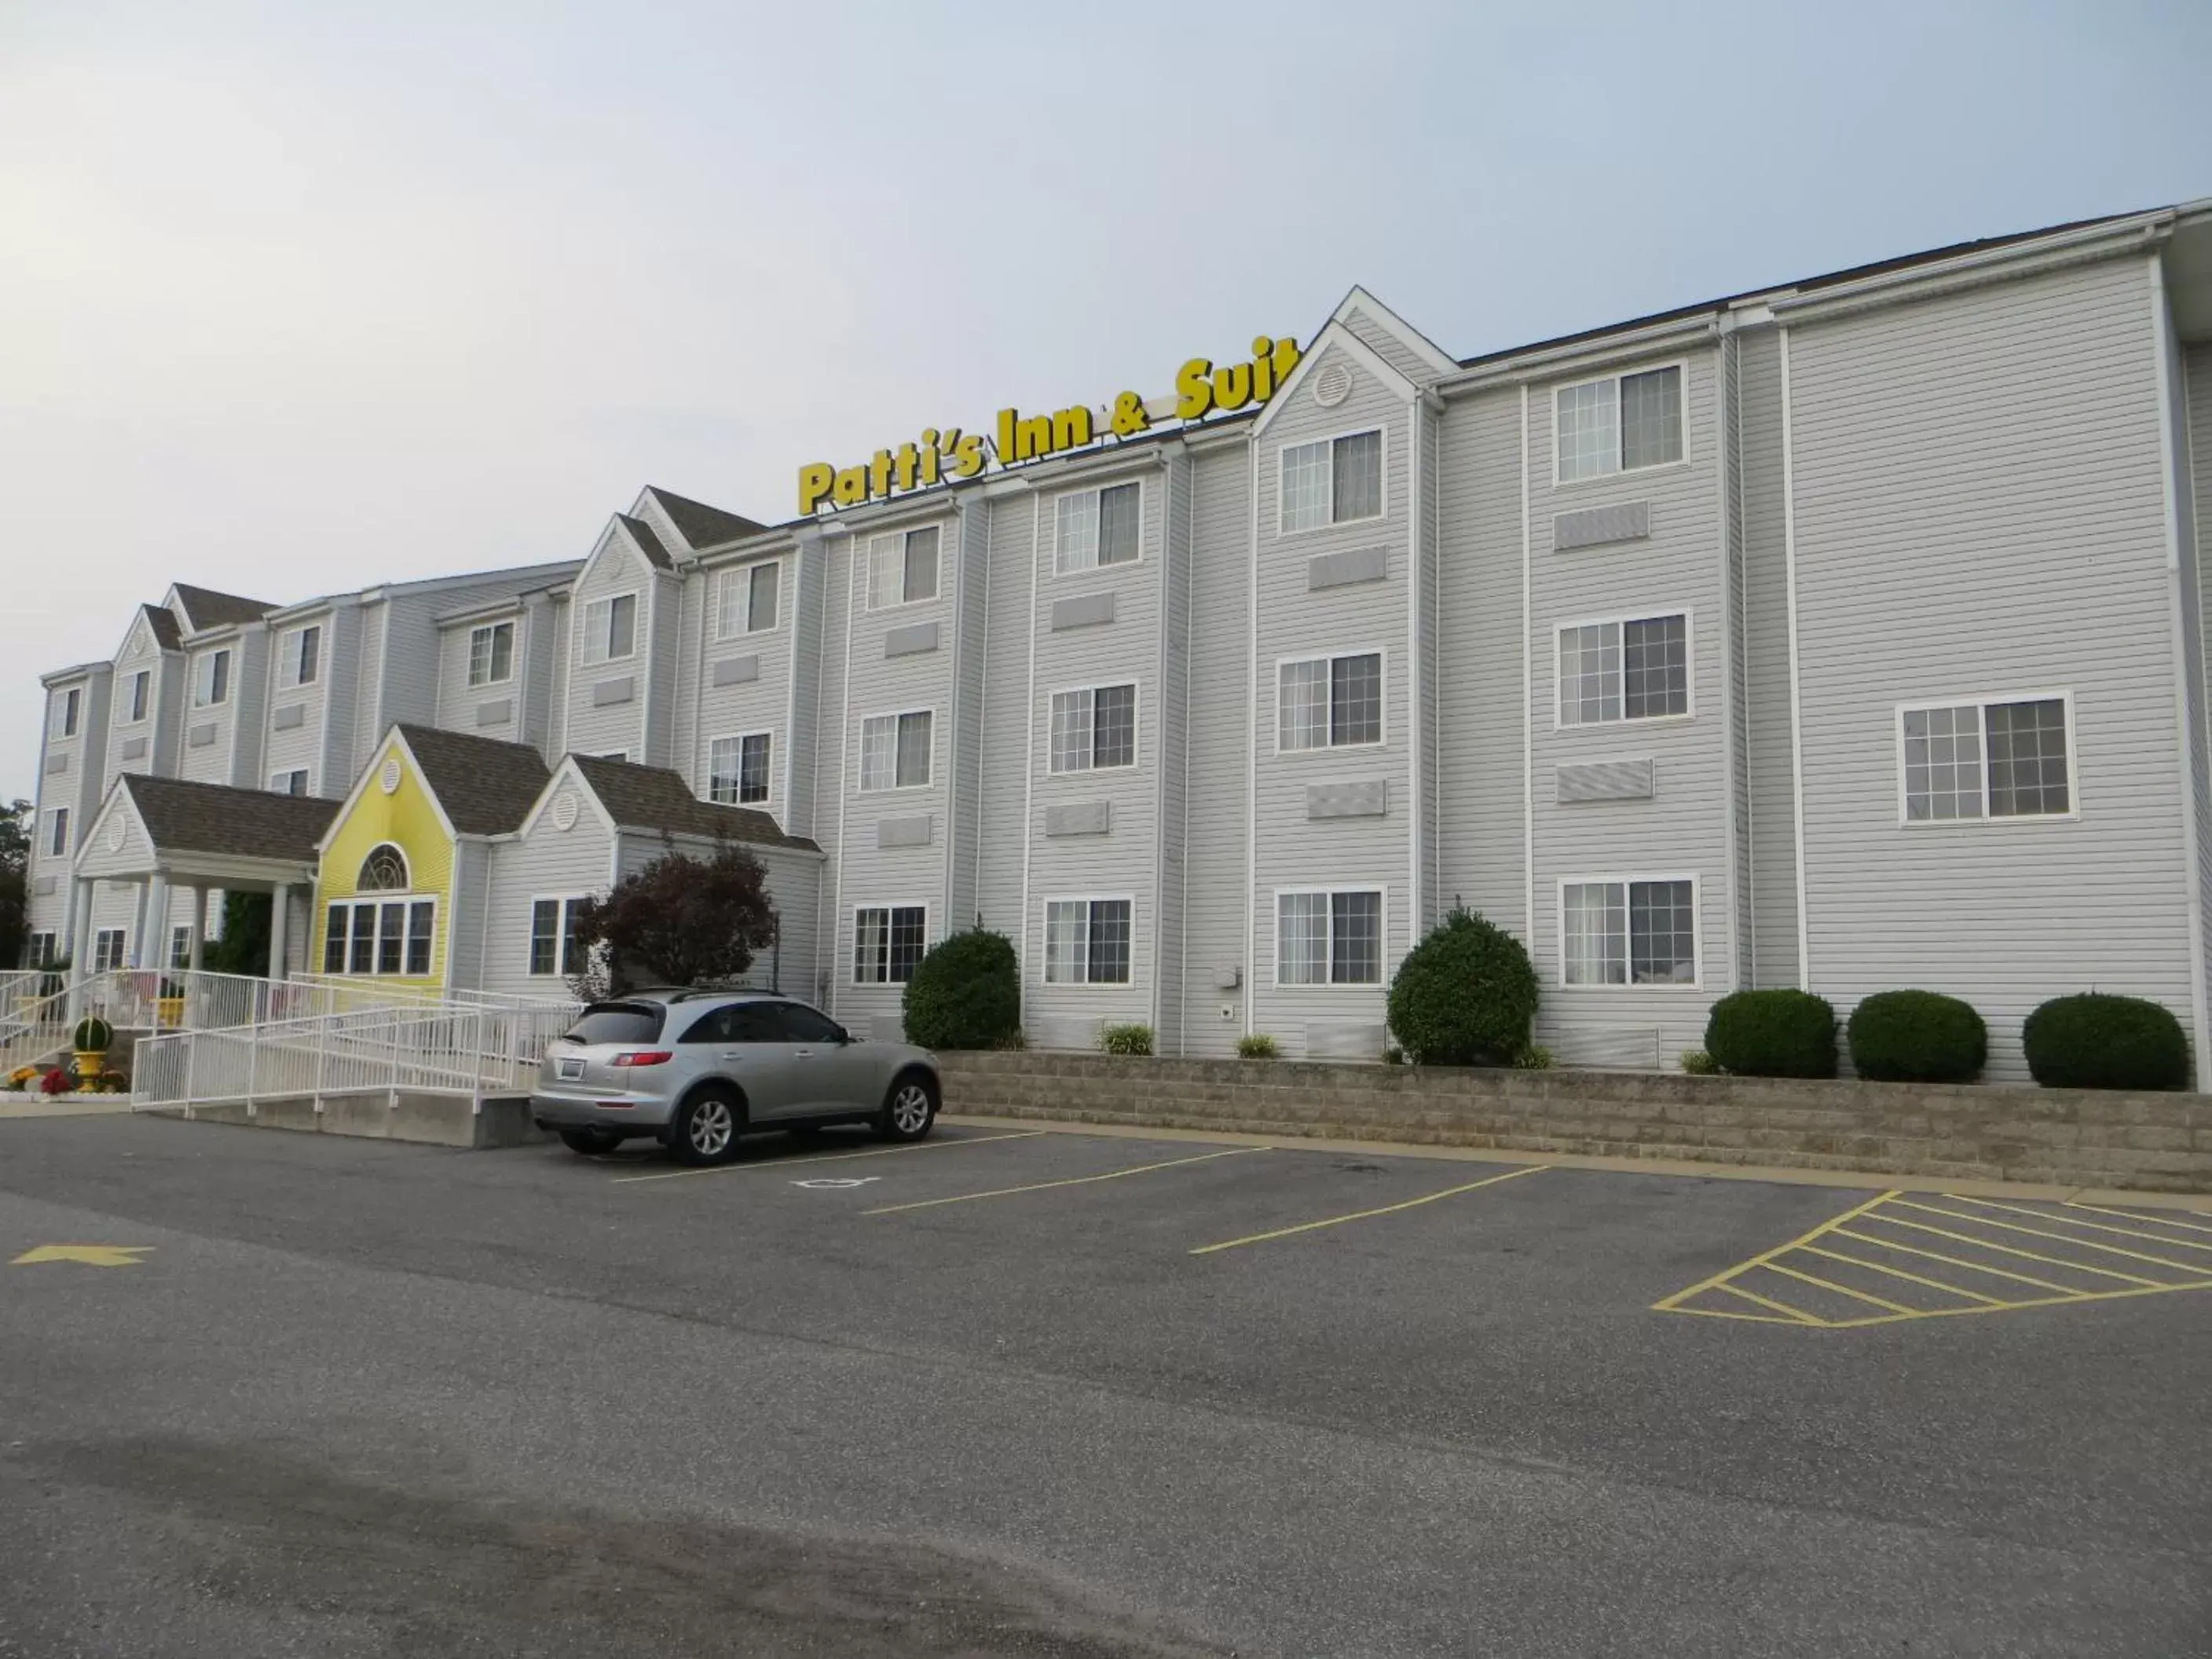 Property Building in Patti's Inn and Suites